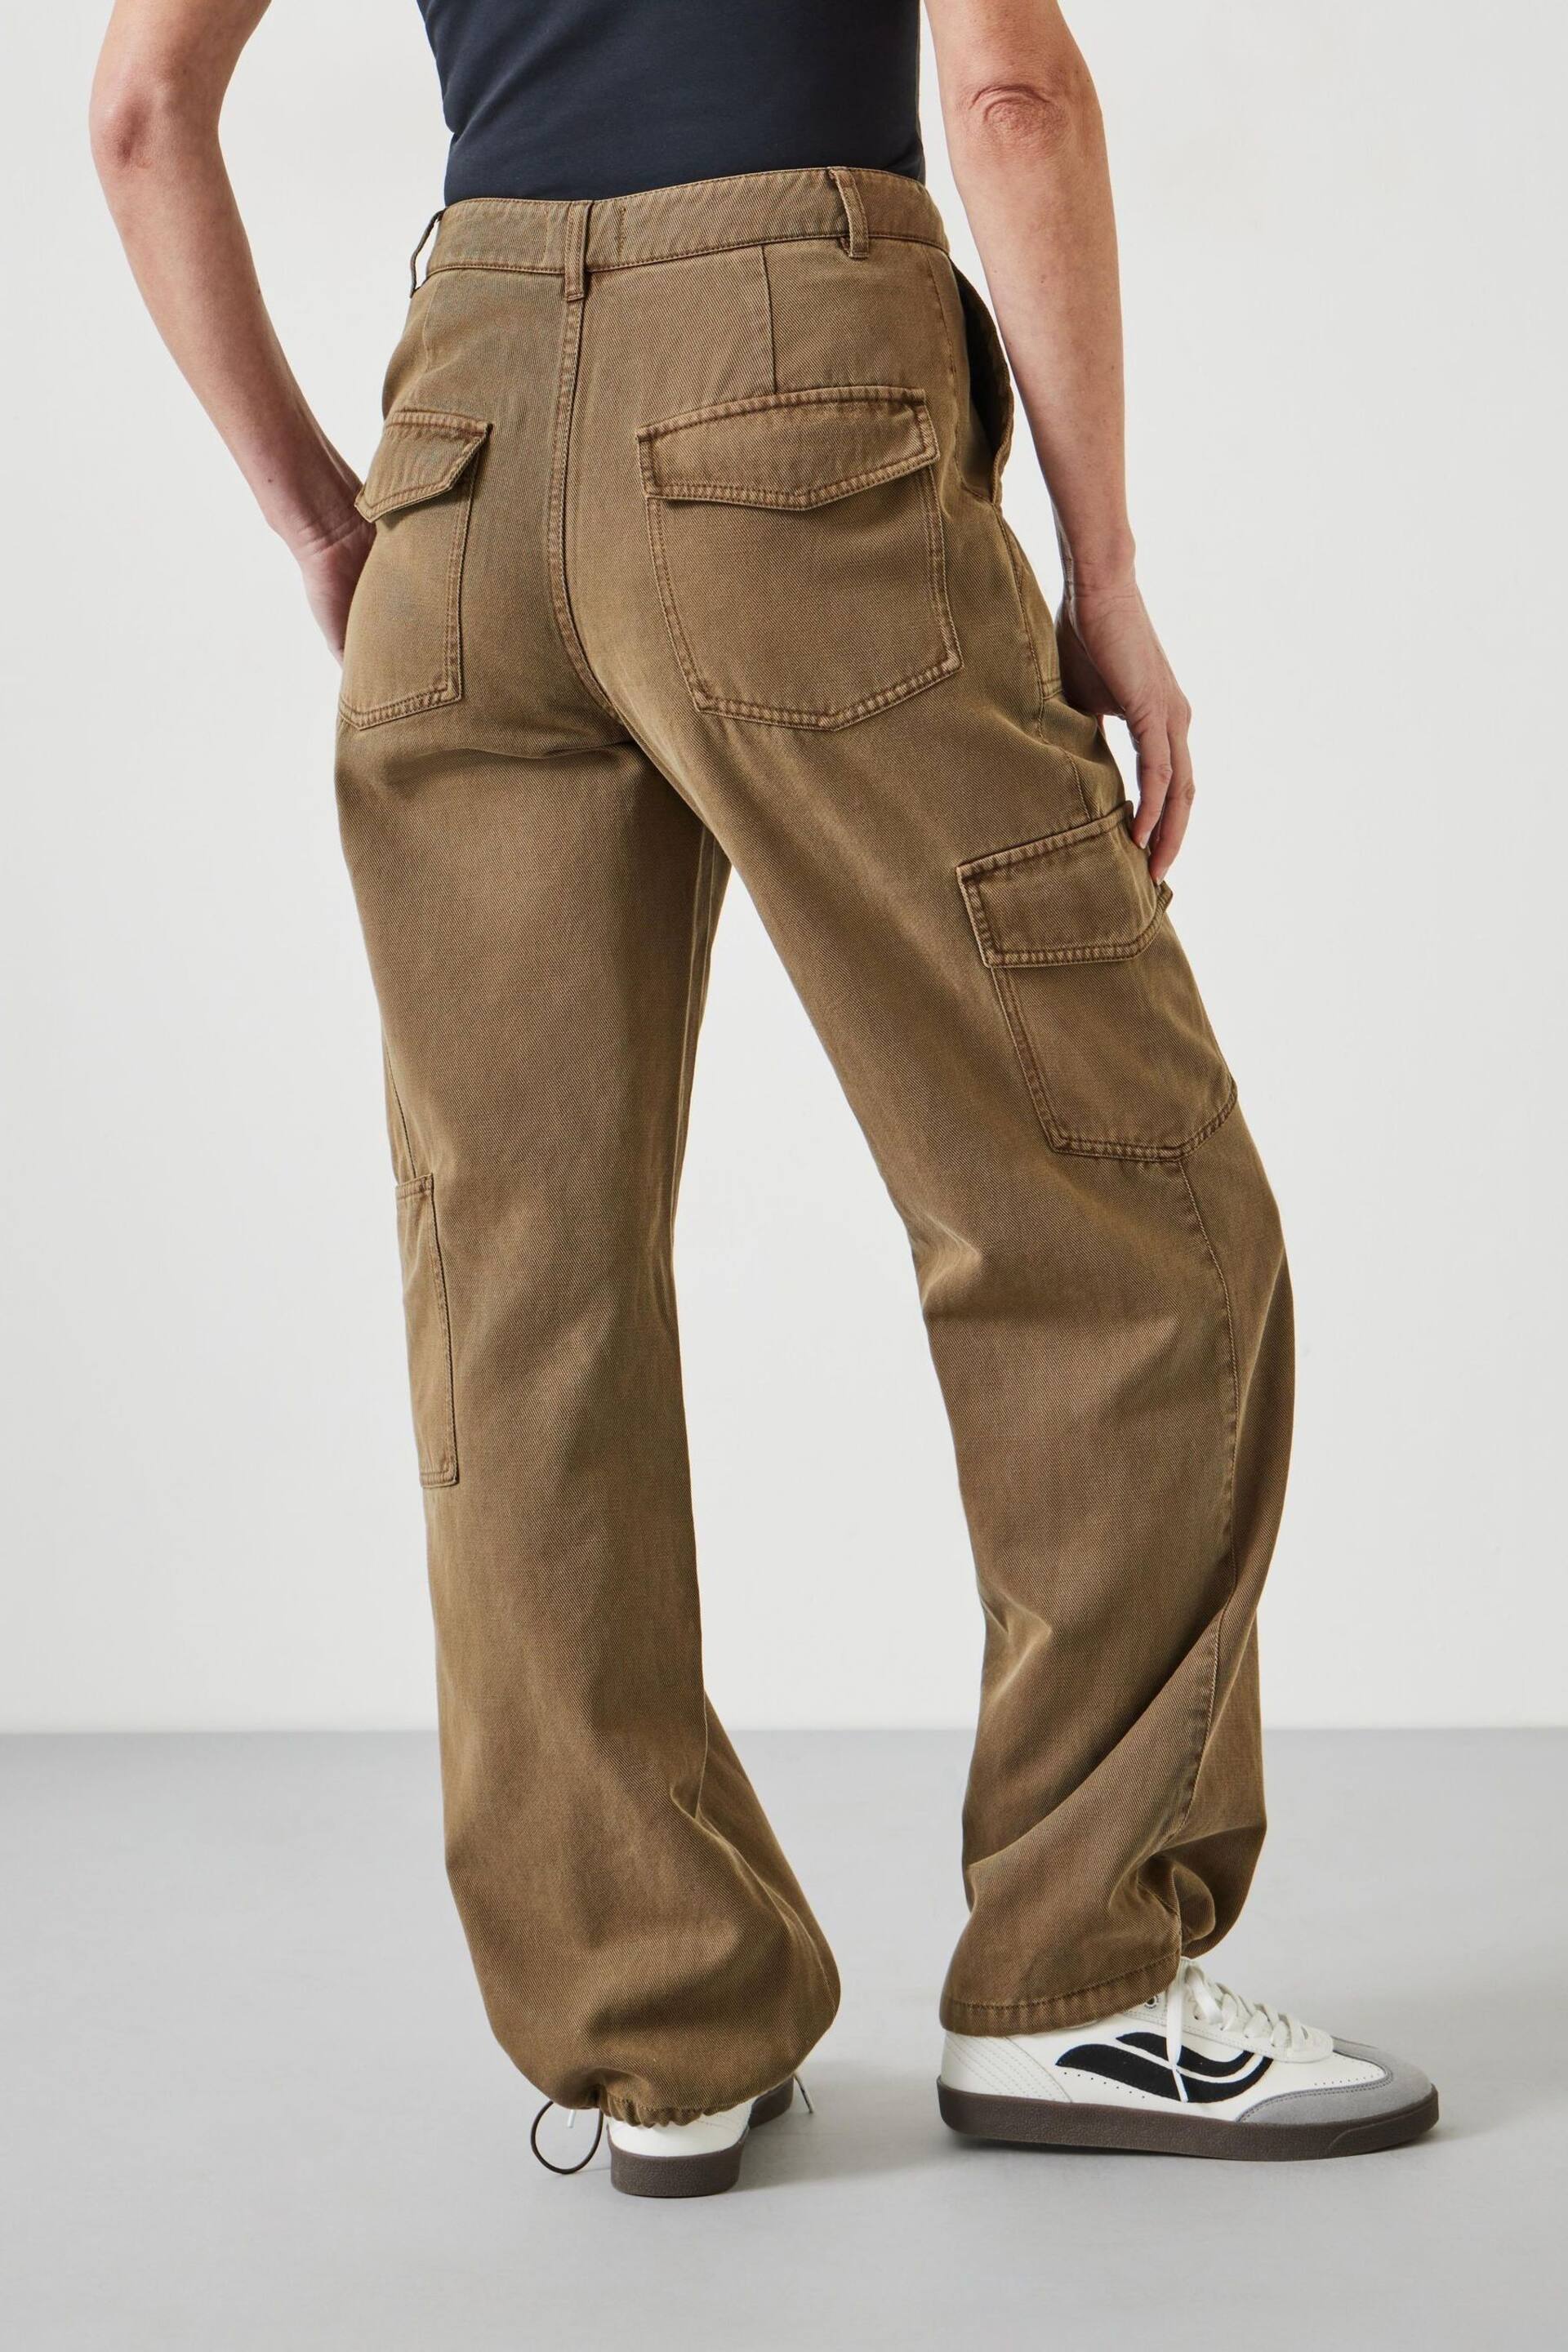 Hush Green Beatrice Soft Utility Trousers - Image 4 of 6